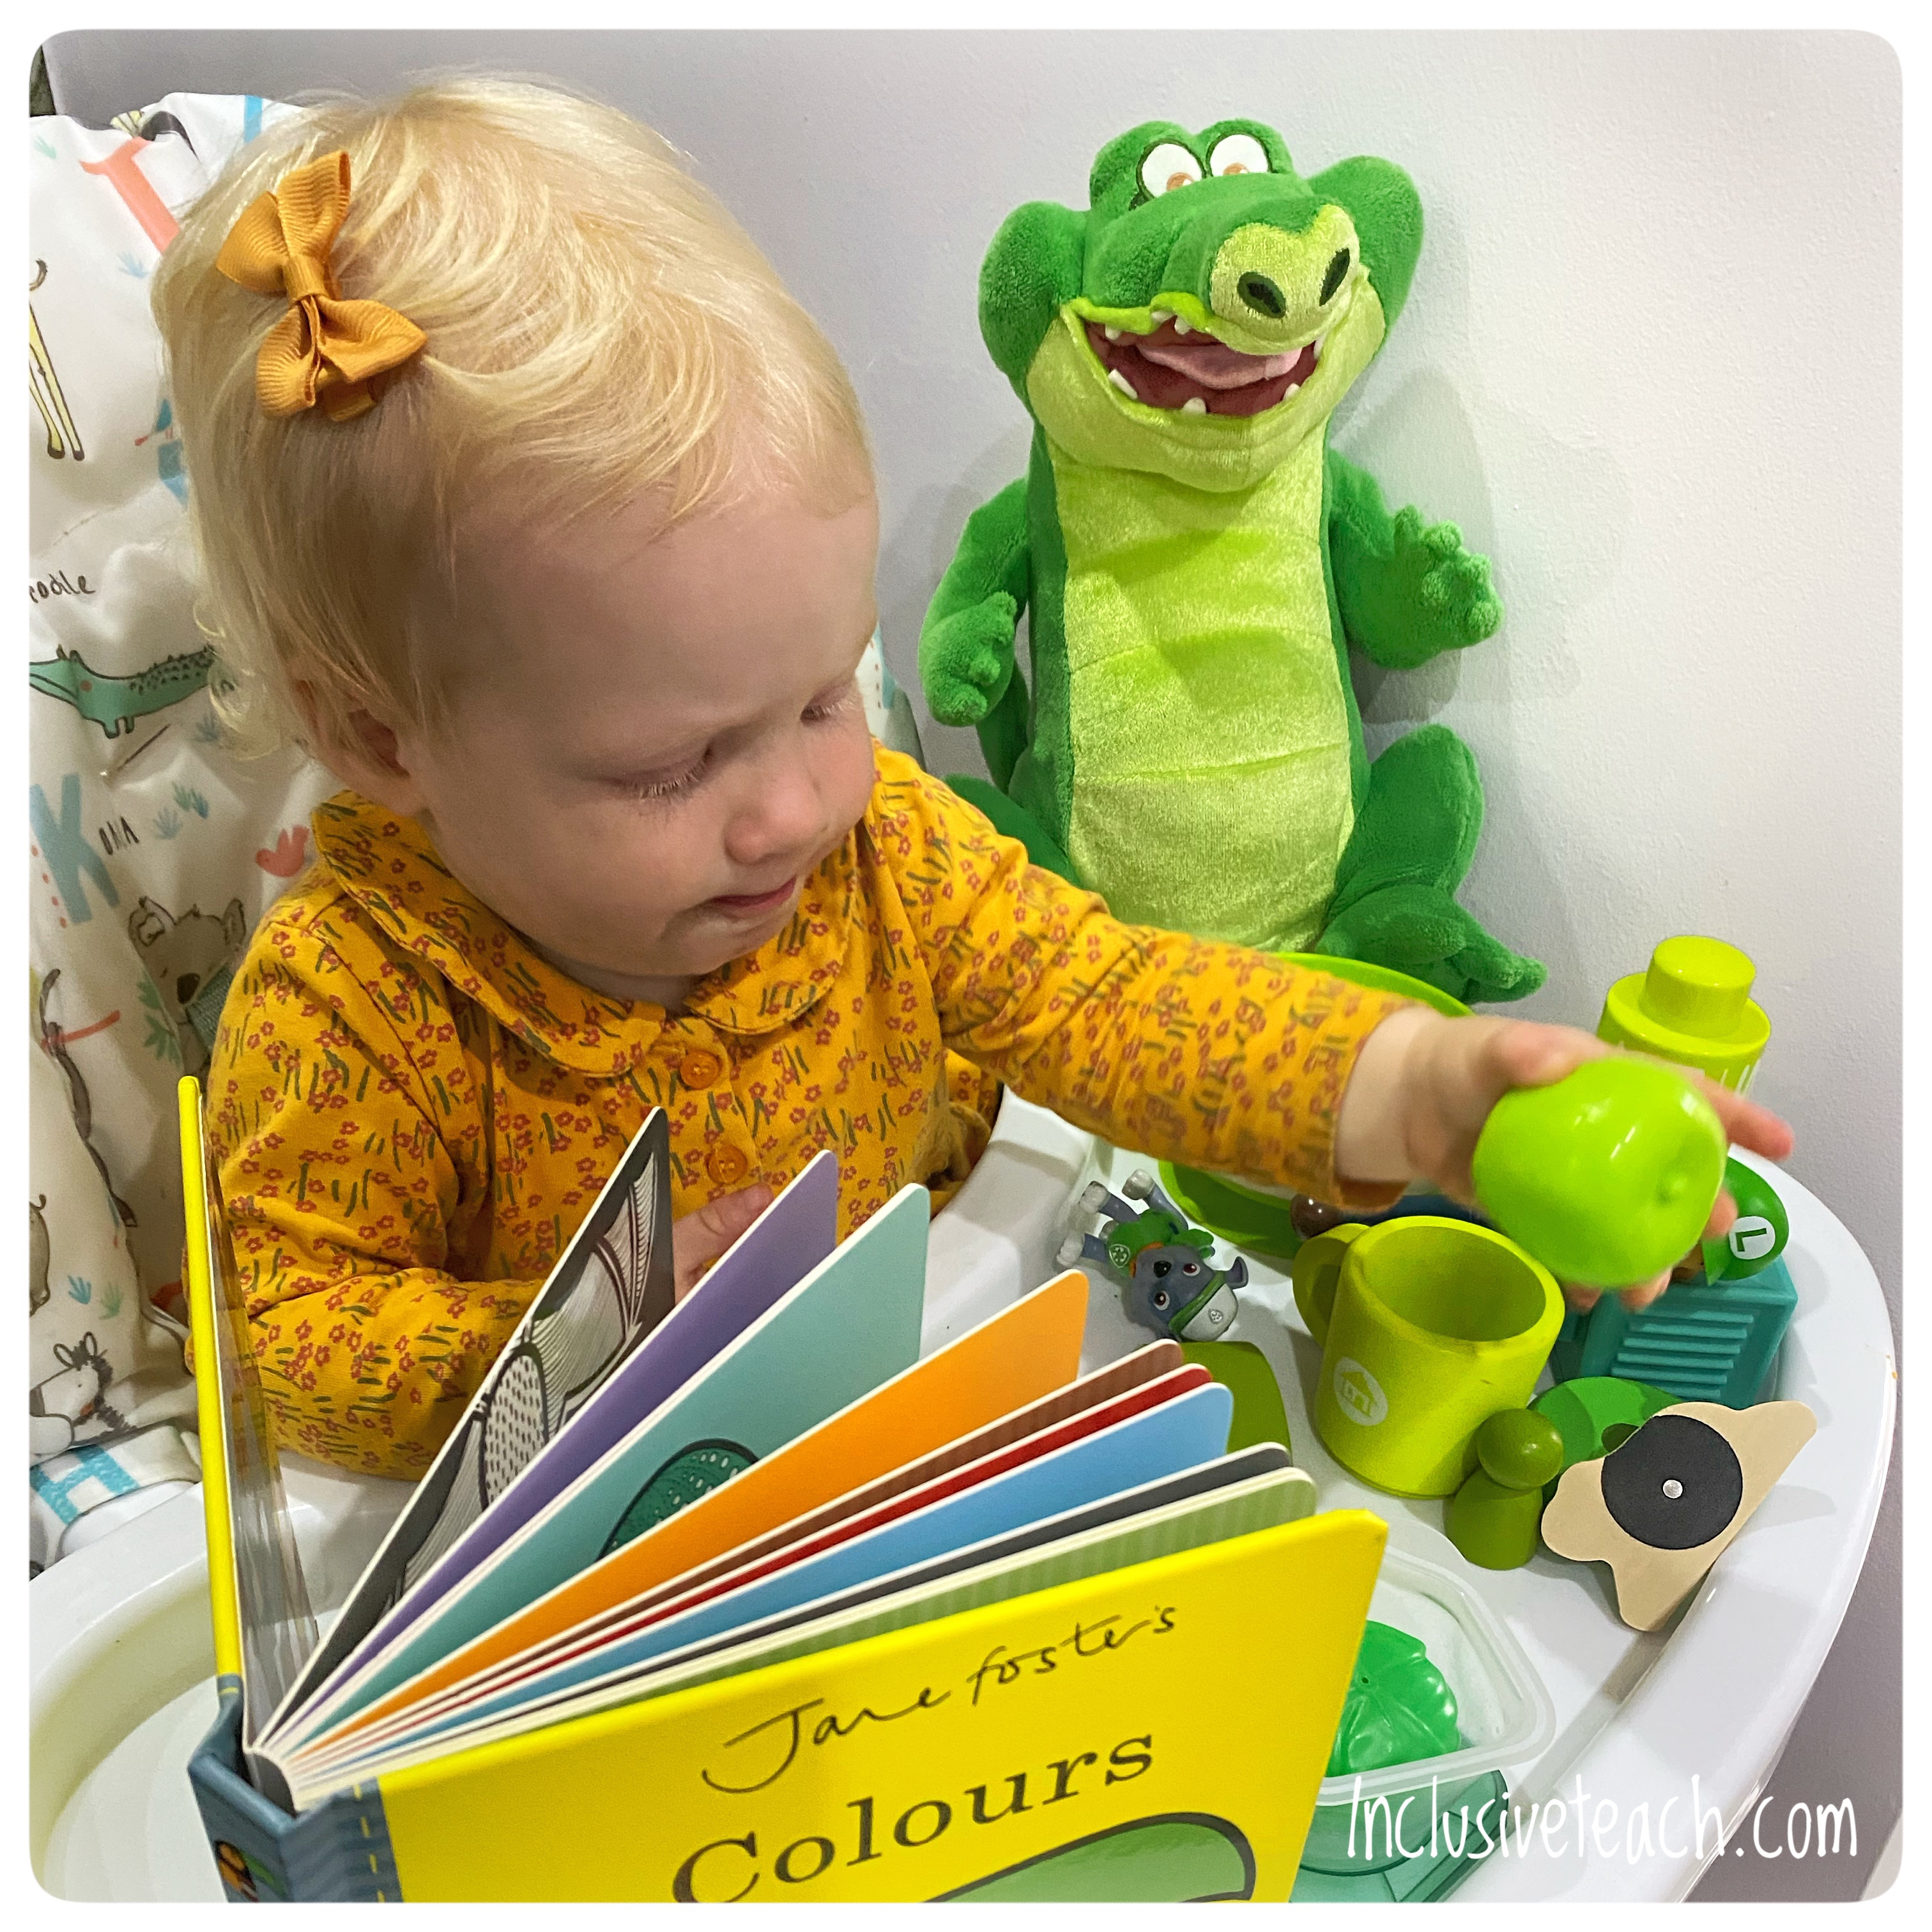 jane fosters colours book review baby books with baby sitting in high chair playing with green toys